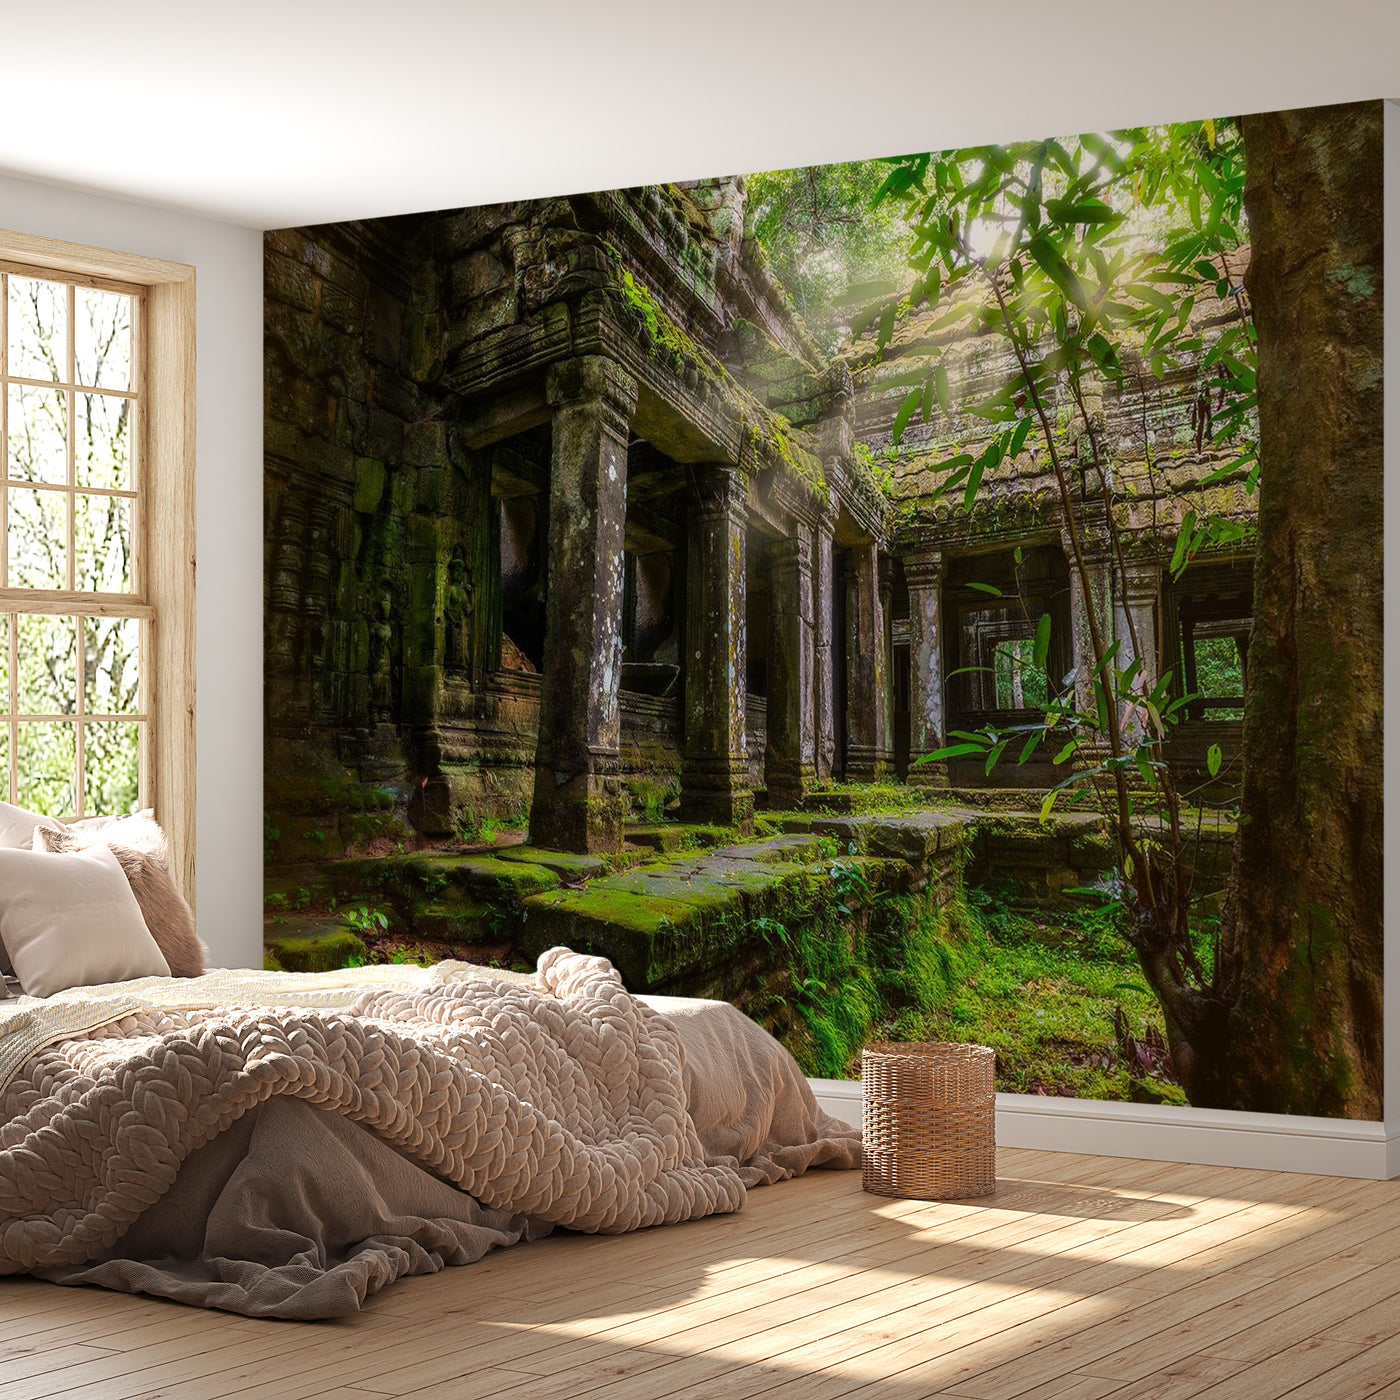 Peel & Stick Nature Wall Mural - Preah Khan - Removable Wall Decals